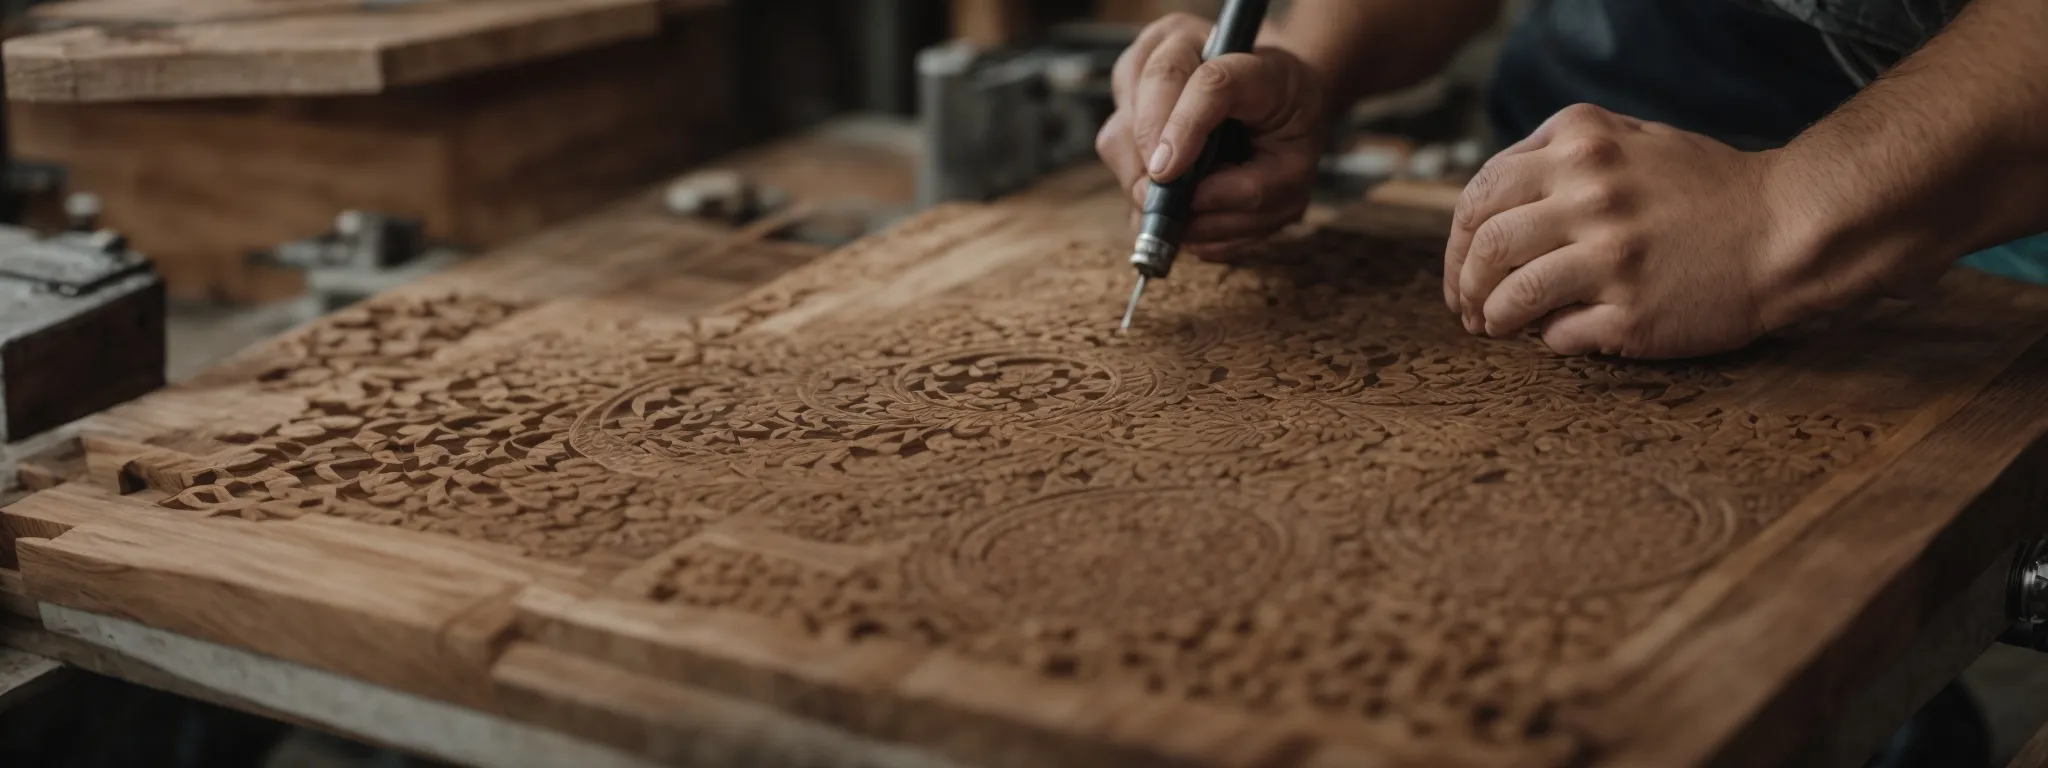 a craftsman carves intricate designs into reclaimed wood in a well-lit, eco-friendly workshop.